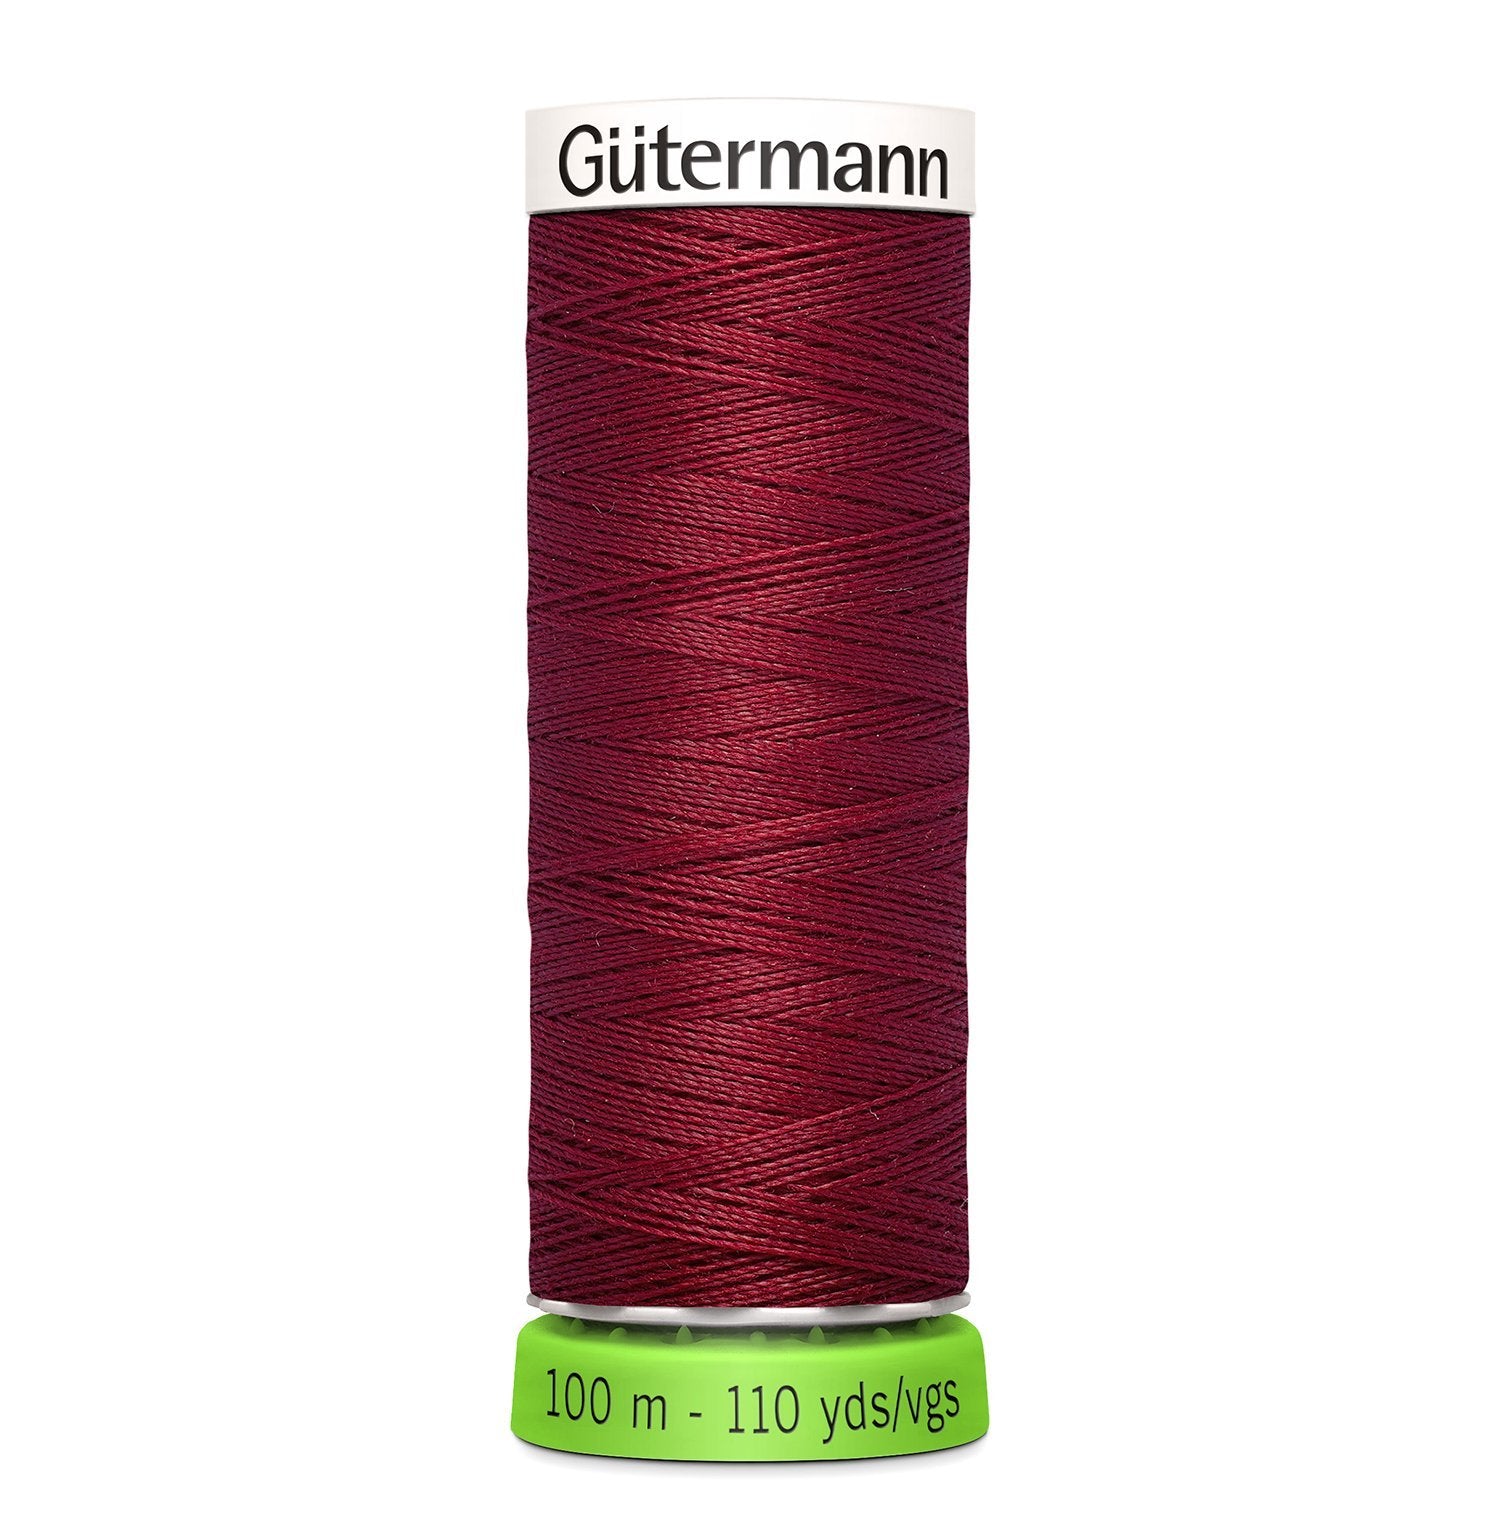 Gutermann Recycled Thread 100m, Colour 226 from Jaycotts Sewing Supplies